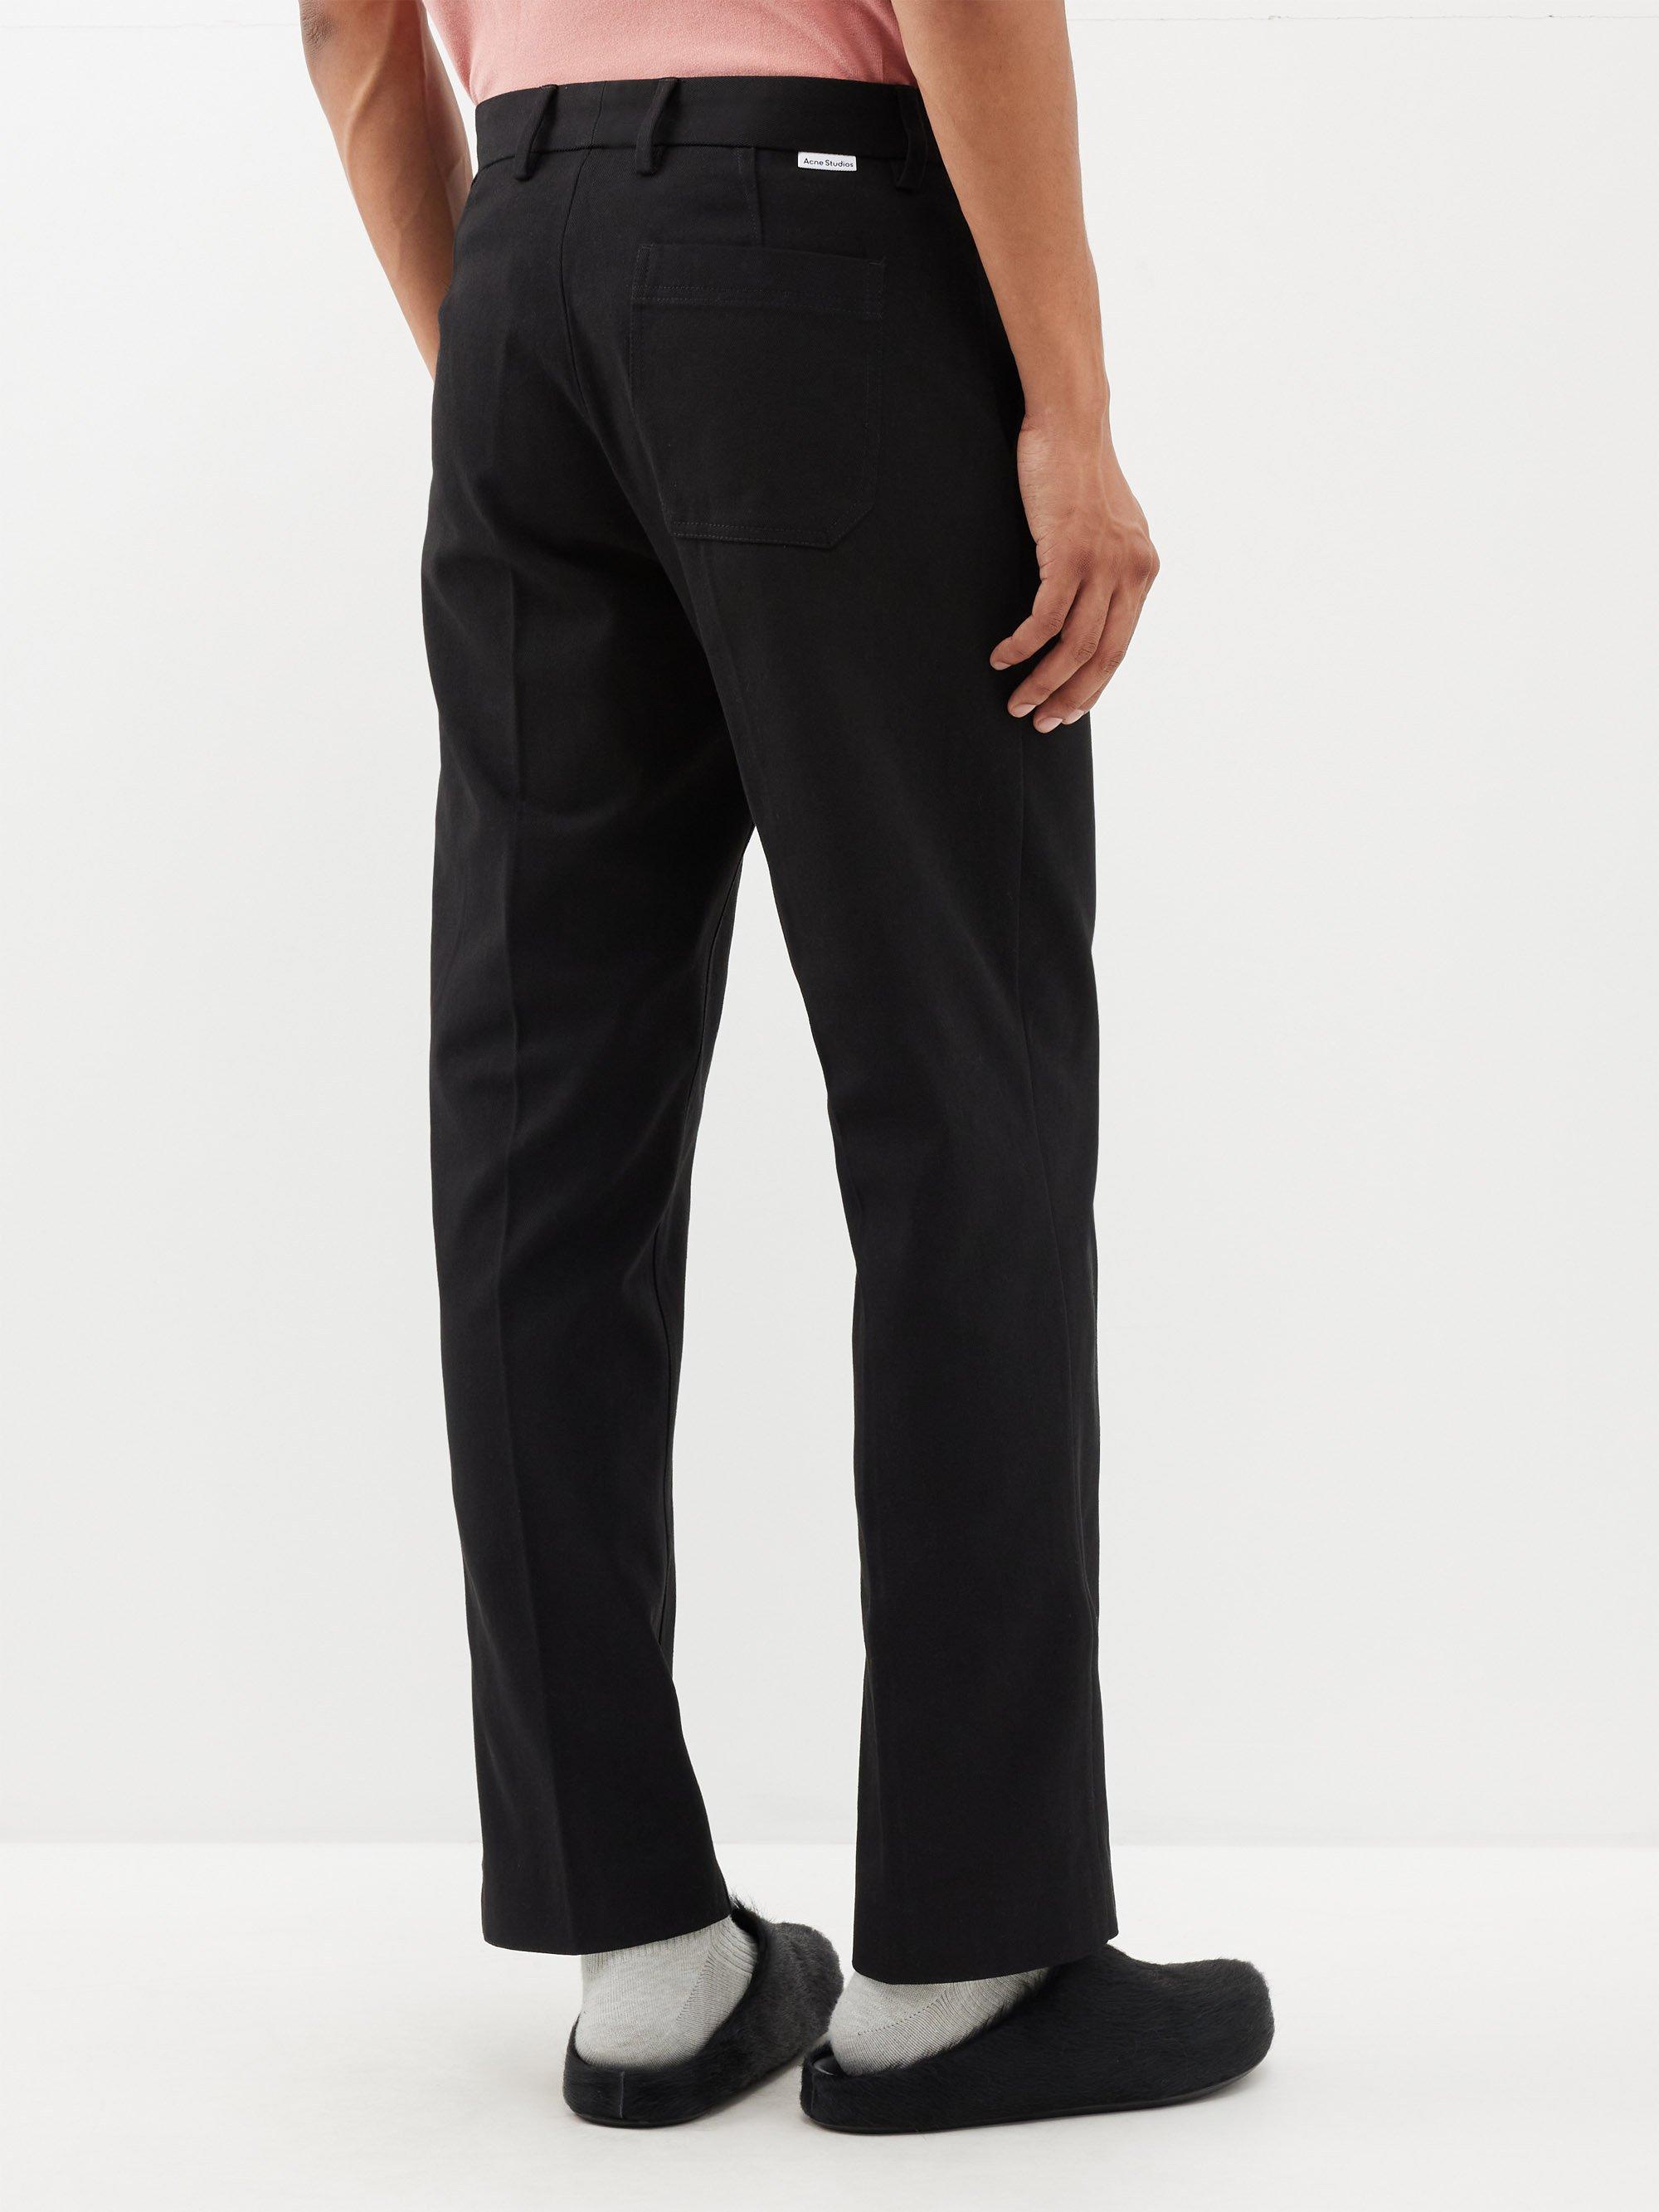 Black Ayonne cotton-blend twill trousers, Acne Studios